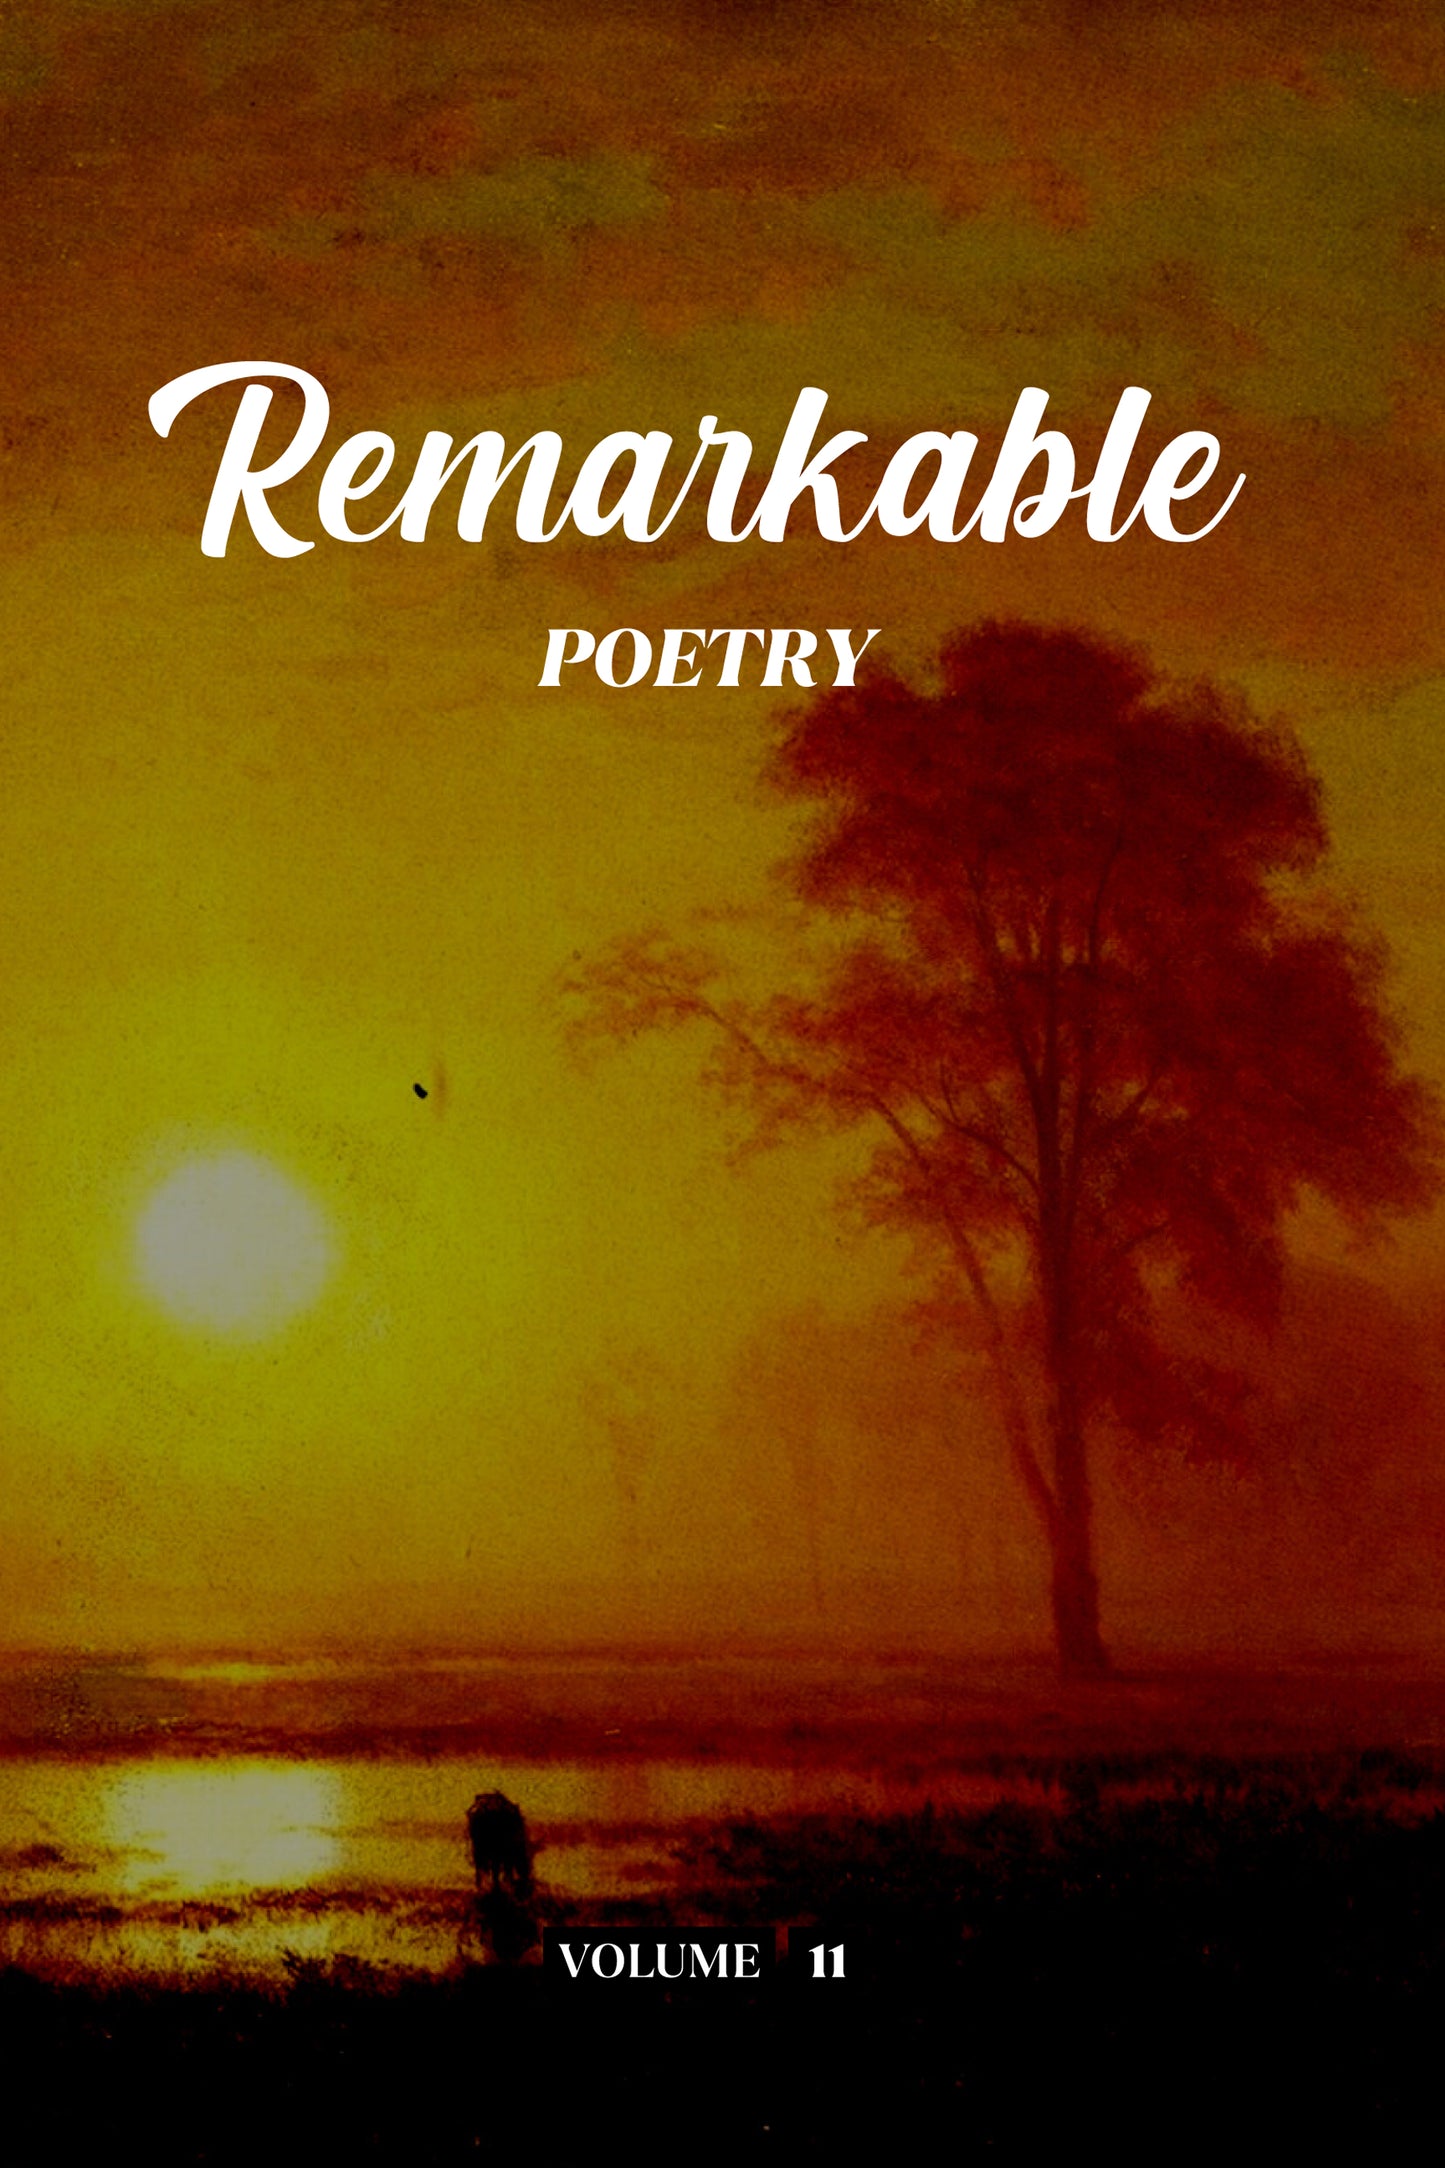 Remarkable Poetry (Volume 11) - Physical Book